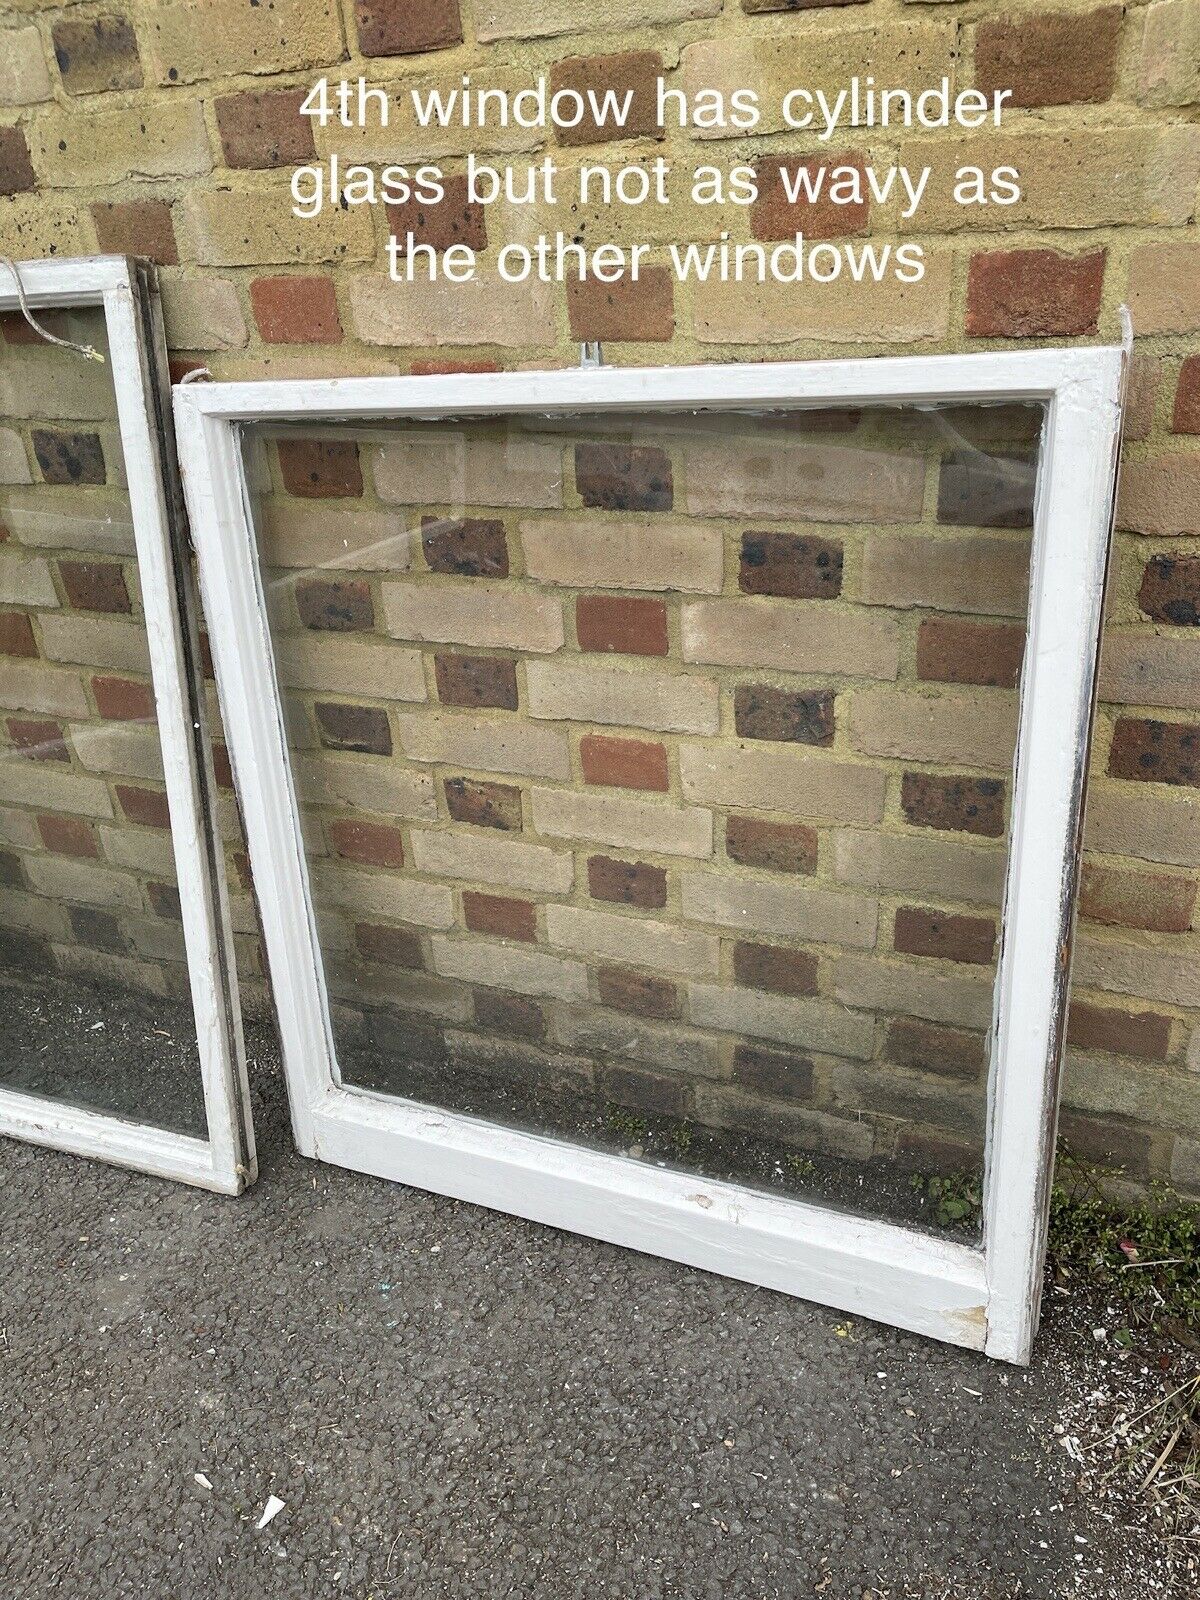 Job Lot Of Reclaimed Old Wooden Panel Sash Windows Cylinder Wavy Glass X 4